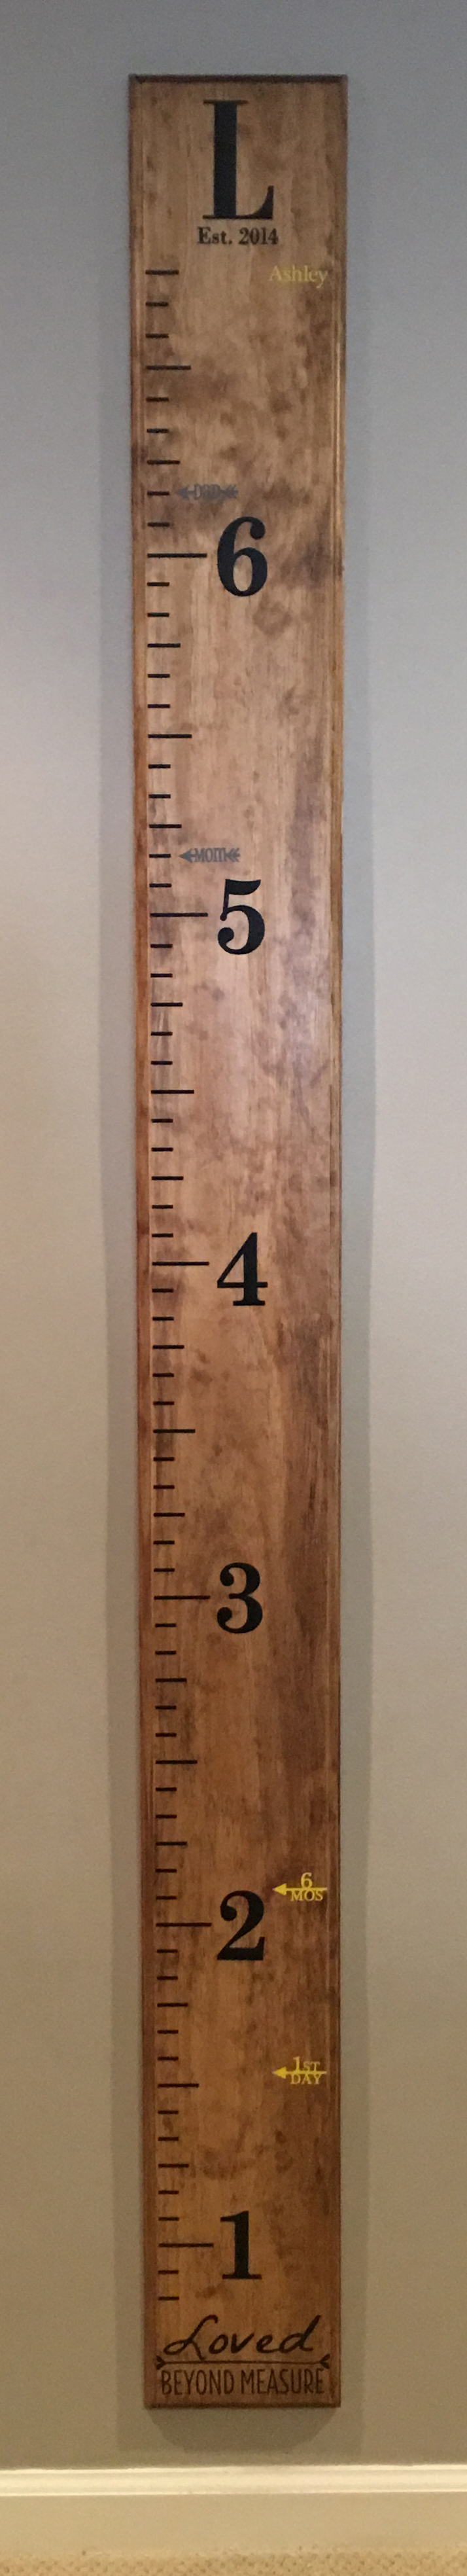 Etsy Order + DIY Project: Creating Our Family's Mobile Growth Chart ...